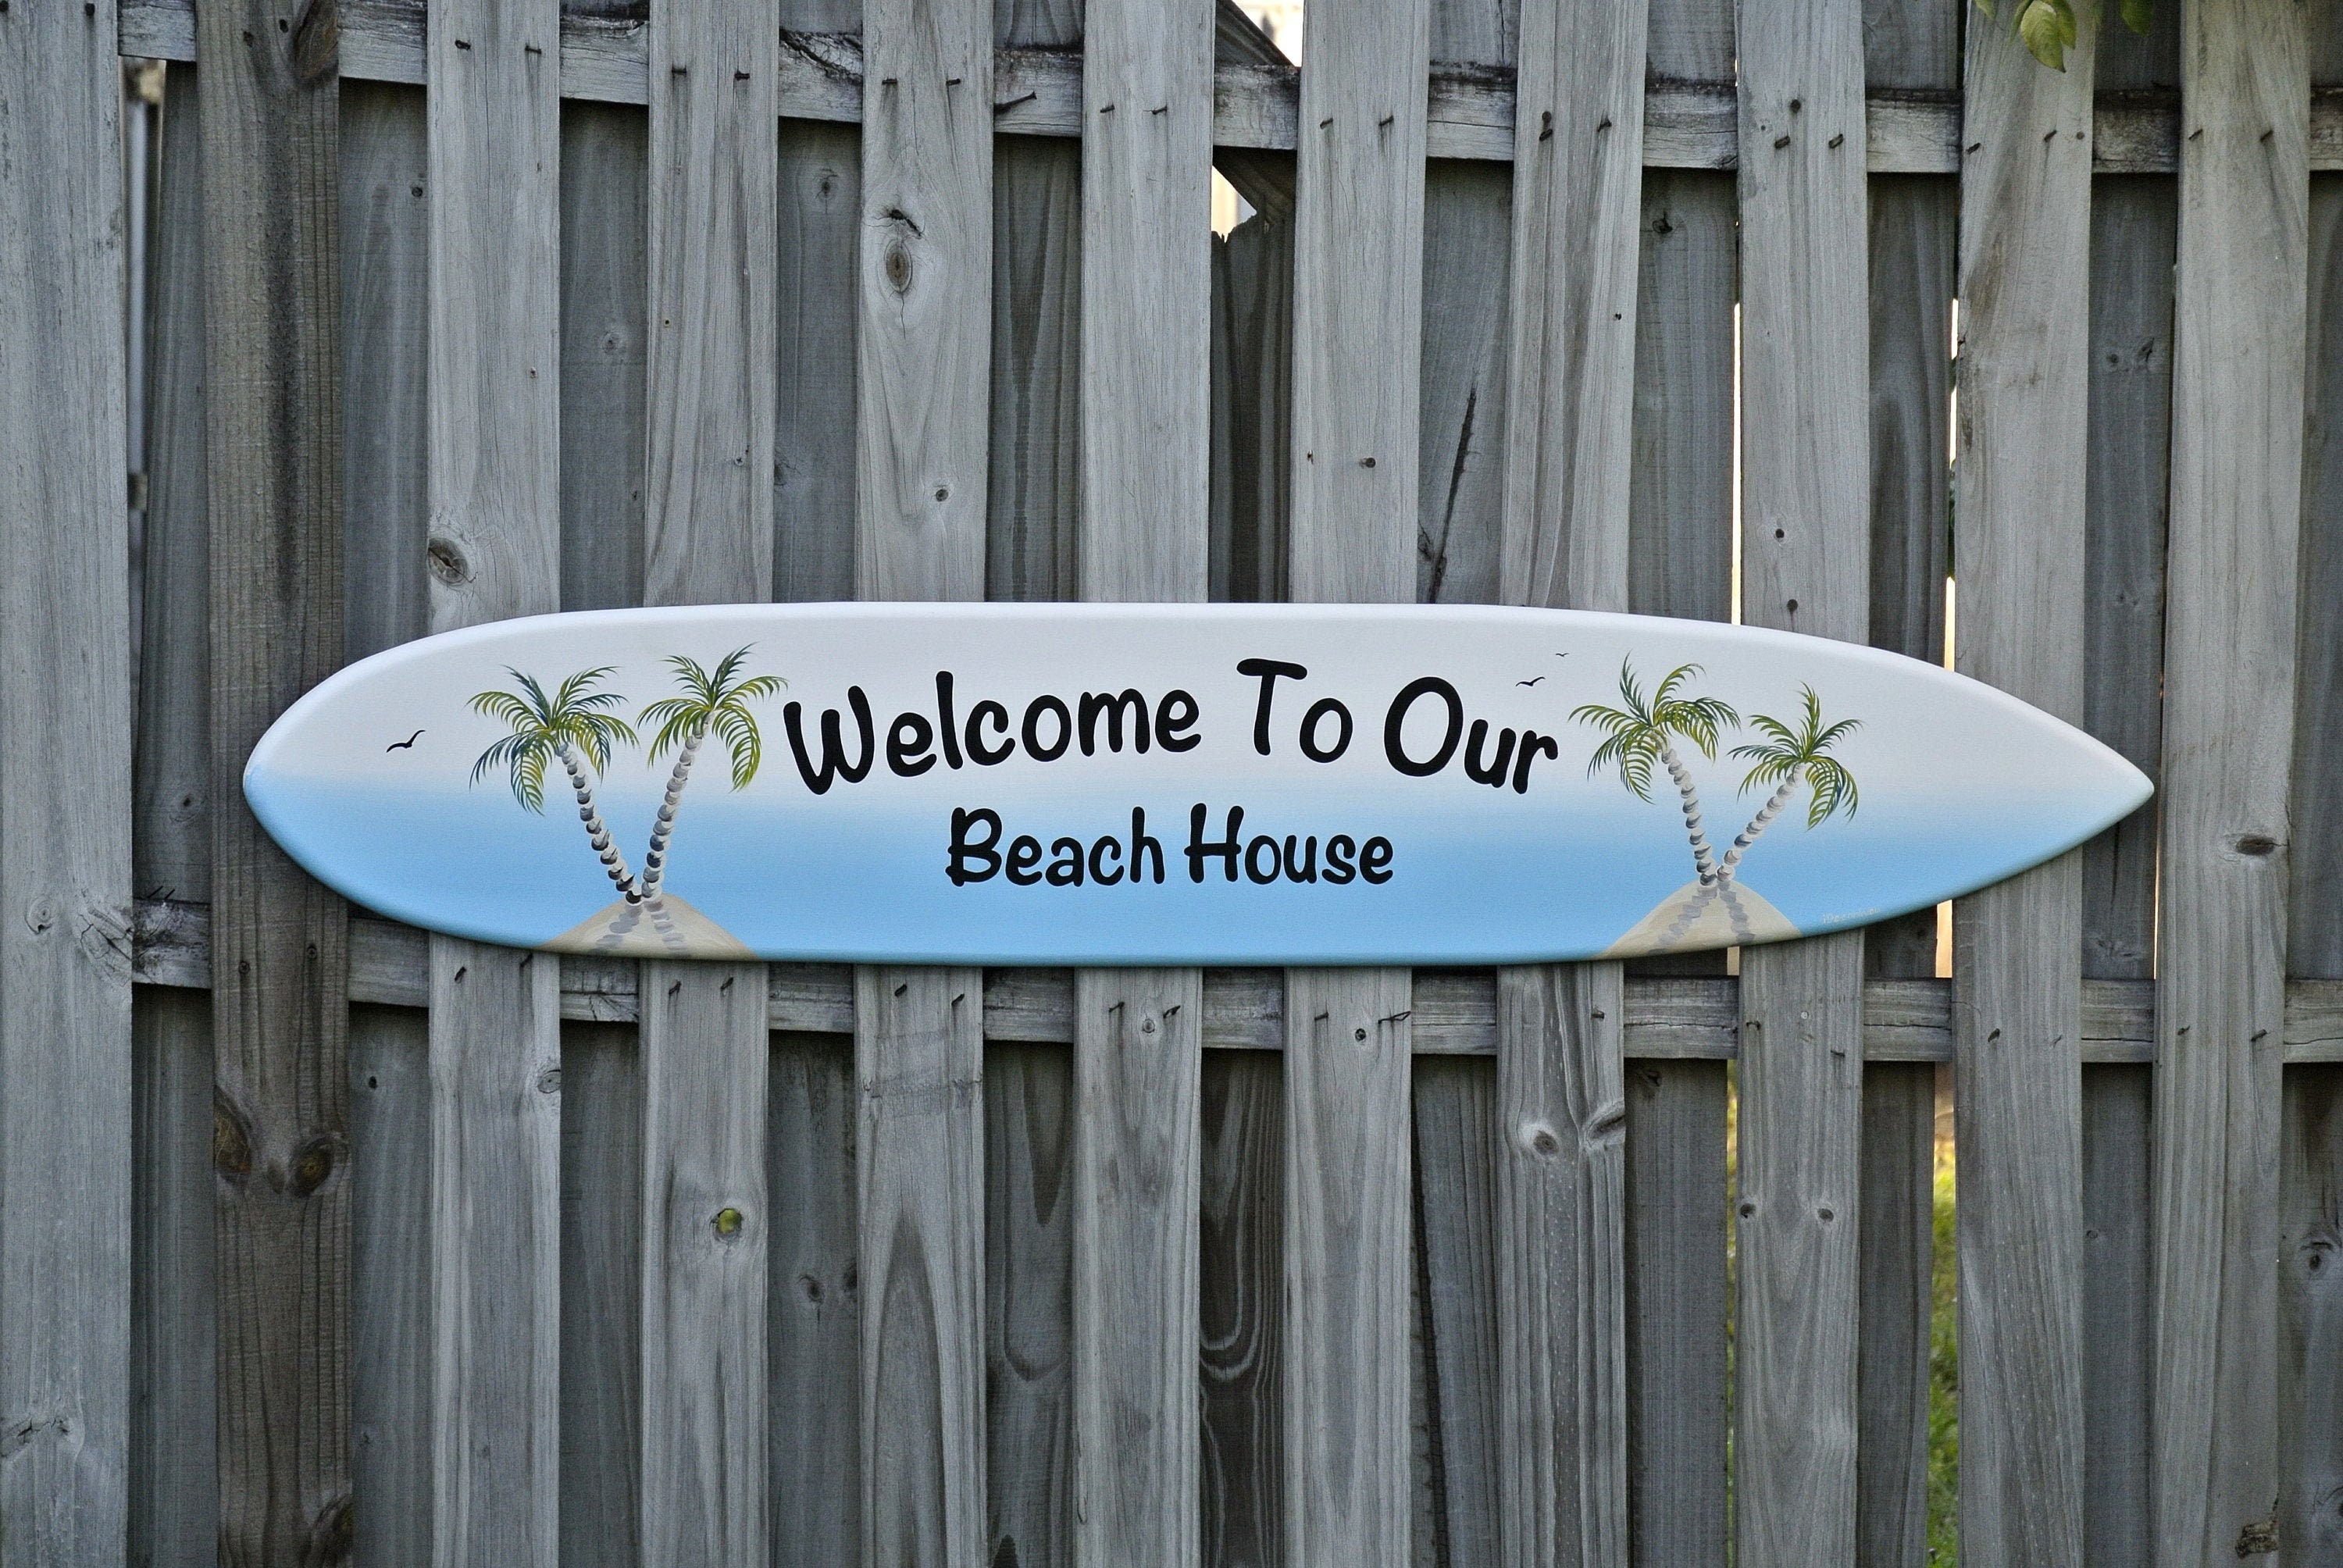 Welcome To Beach House Surfboard Wall Decor Surfboard Wood Sign For